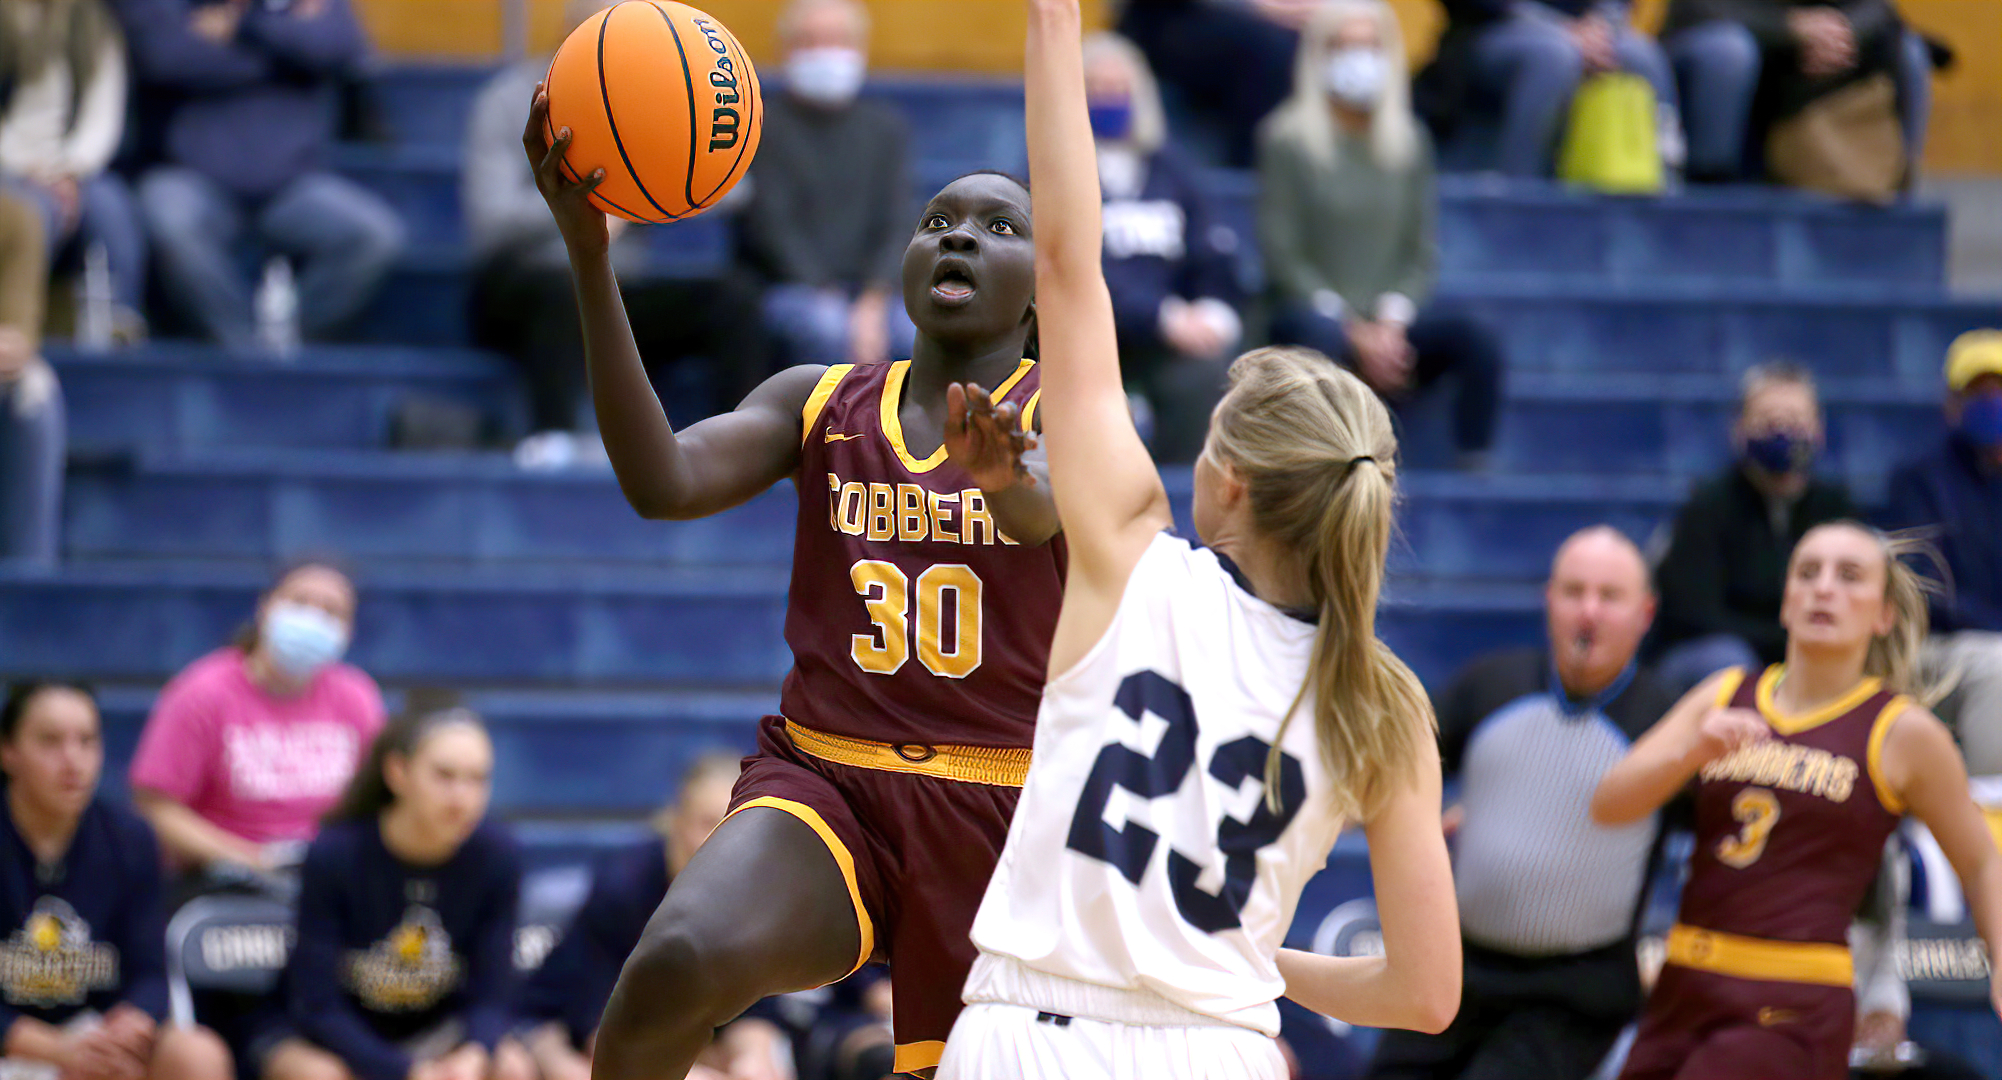 Mary Sem lays in two of her 13 points during the first half of the Cobbers' game at Carleton (Photo courtesy of Ryan Coleman, D3photography)